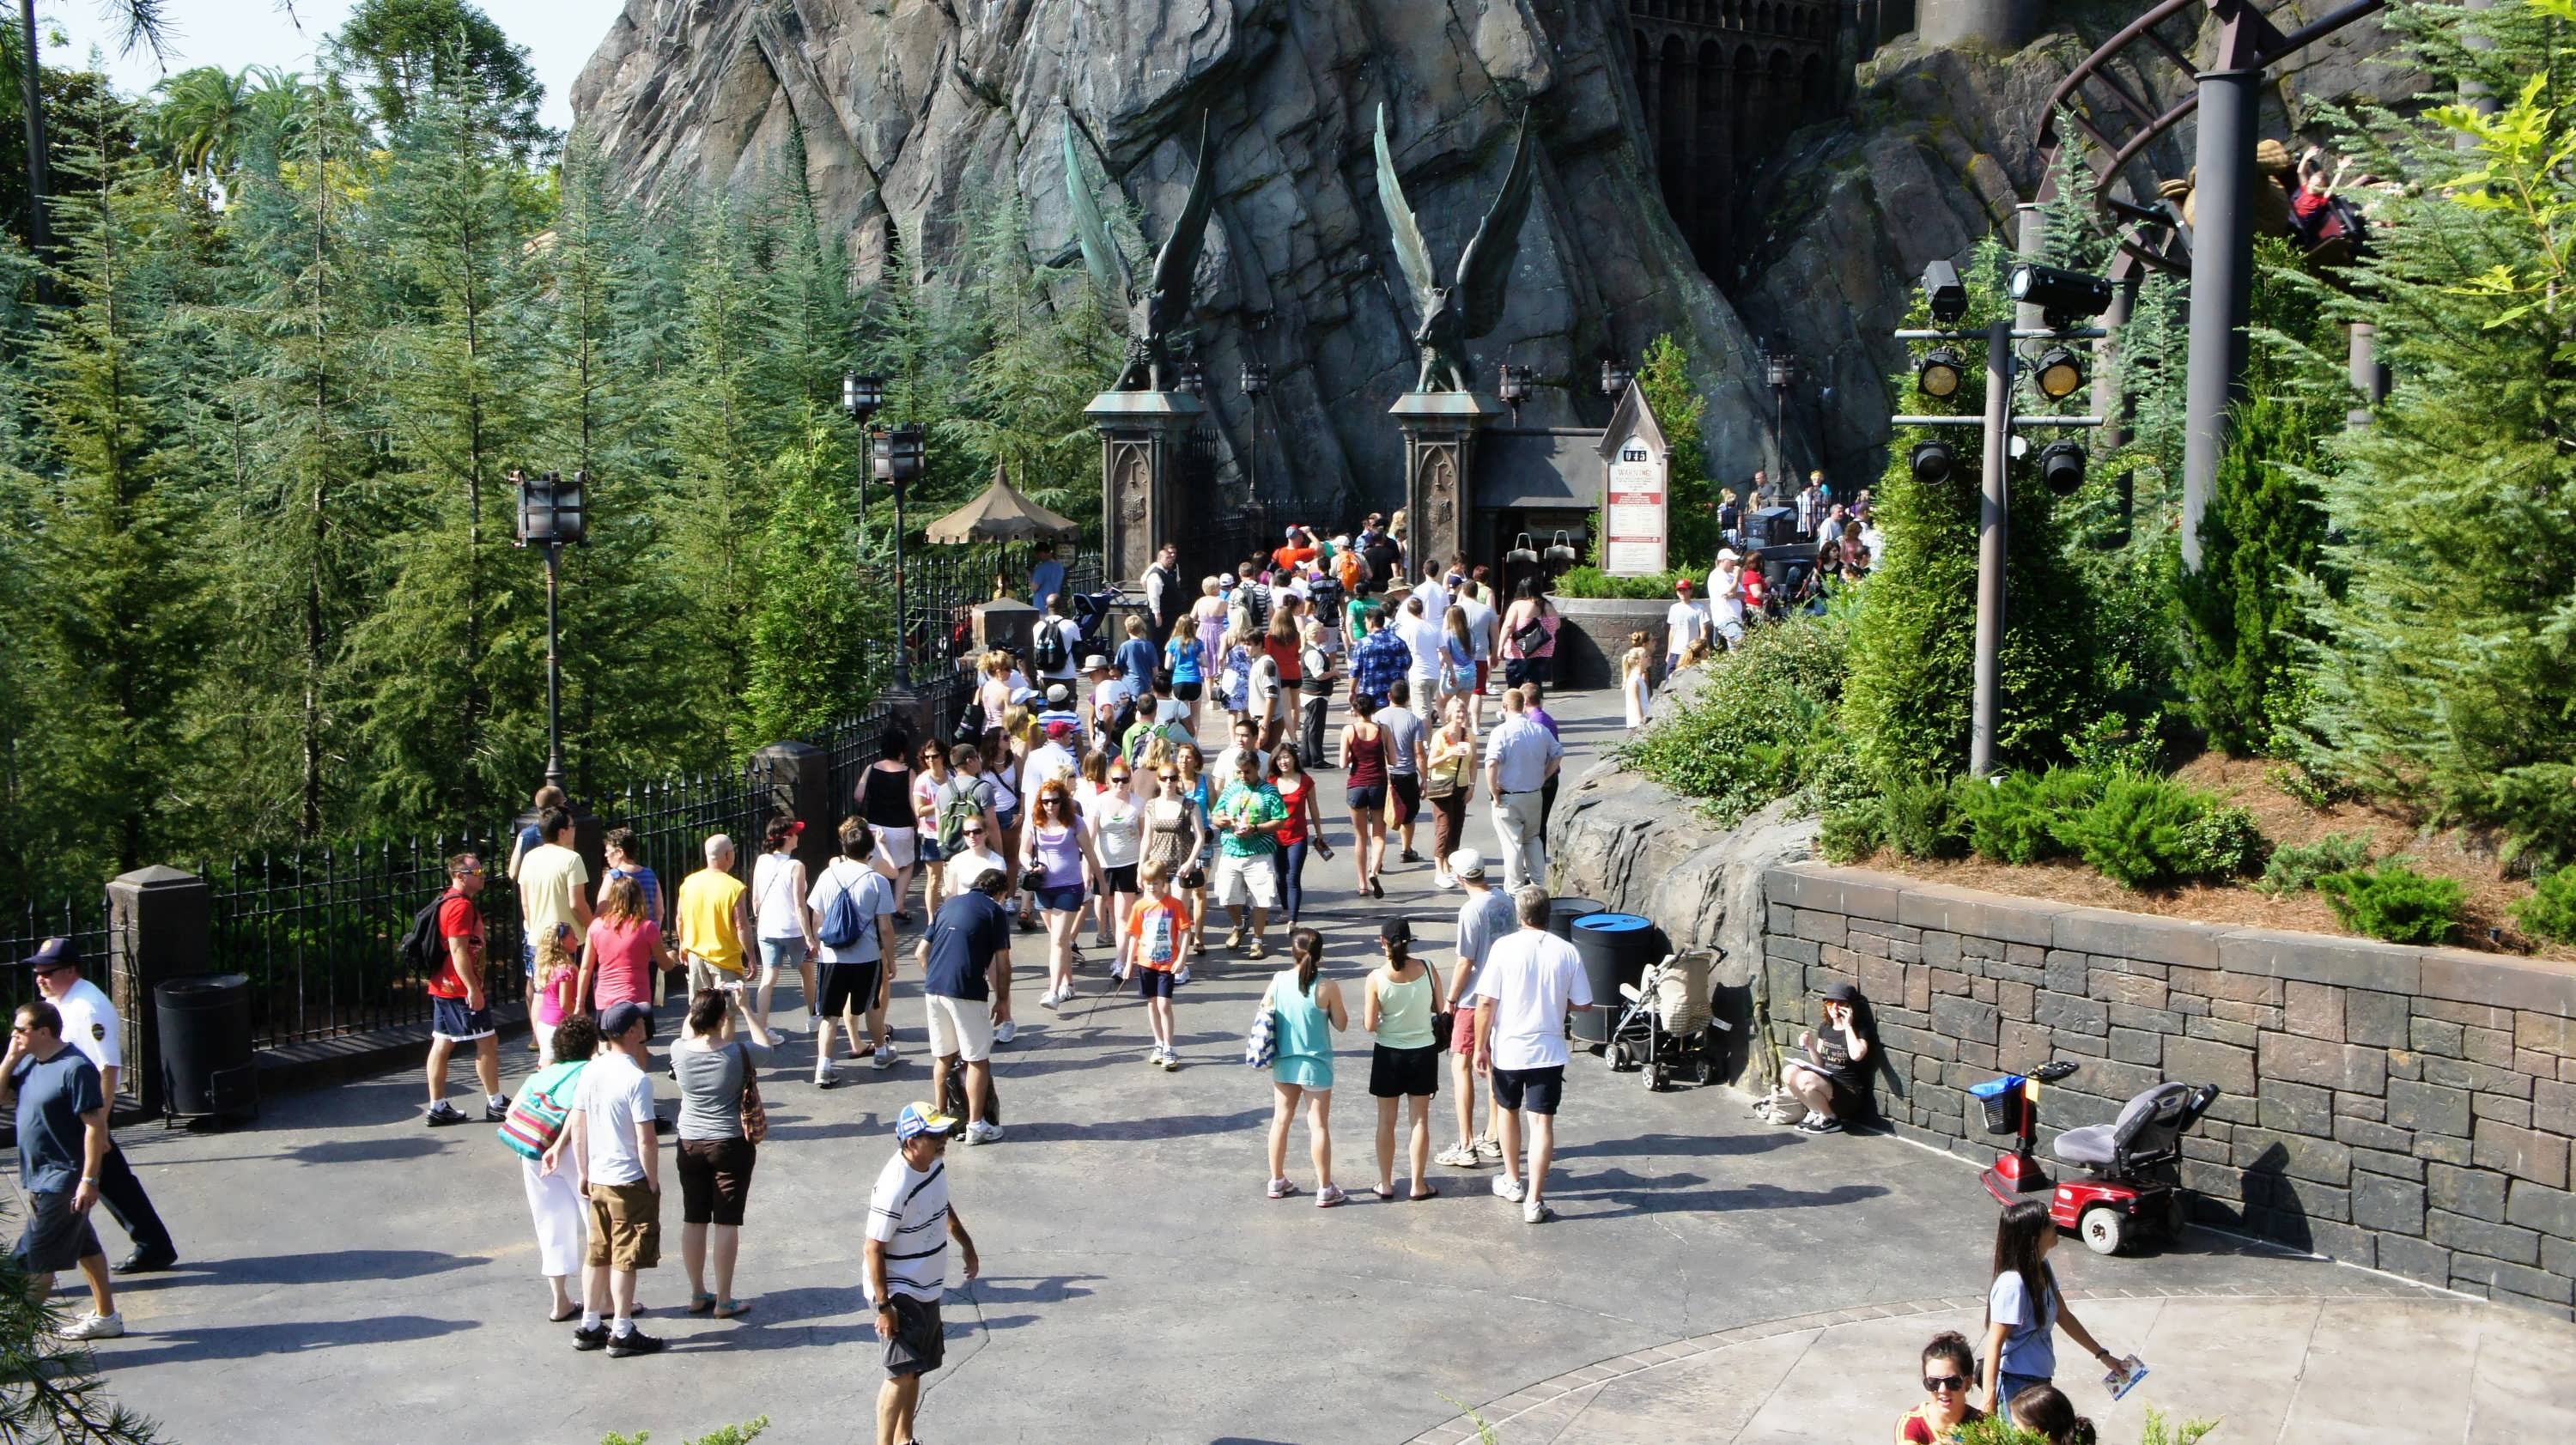 View from Dragon Challenge queue at Universal's Islands of Adventure